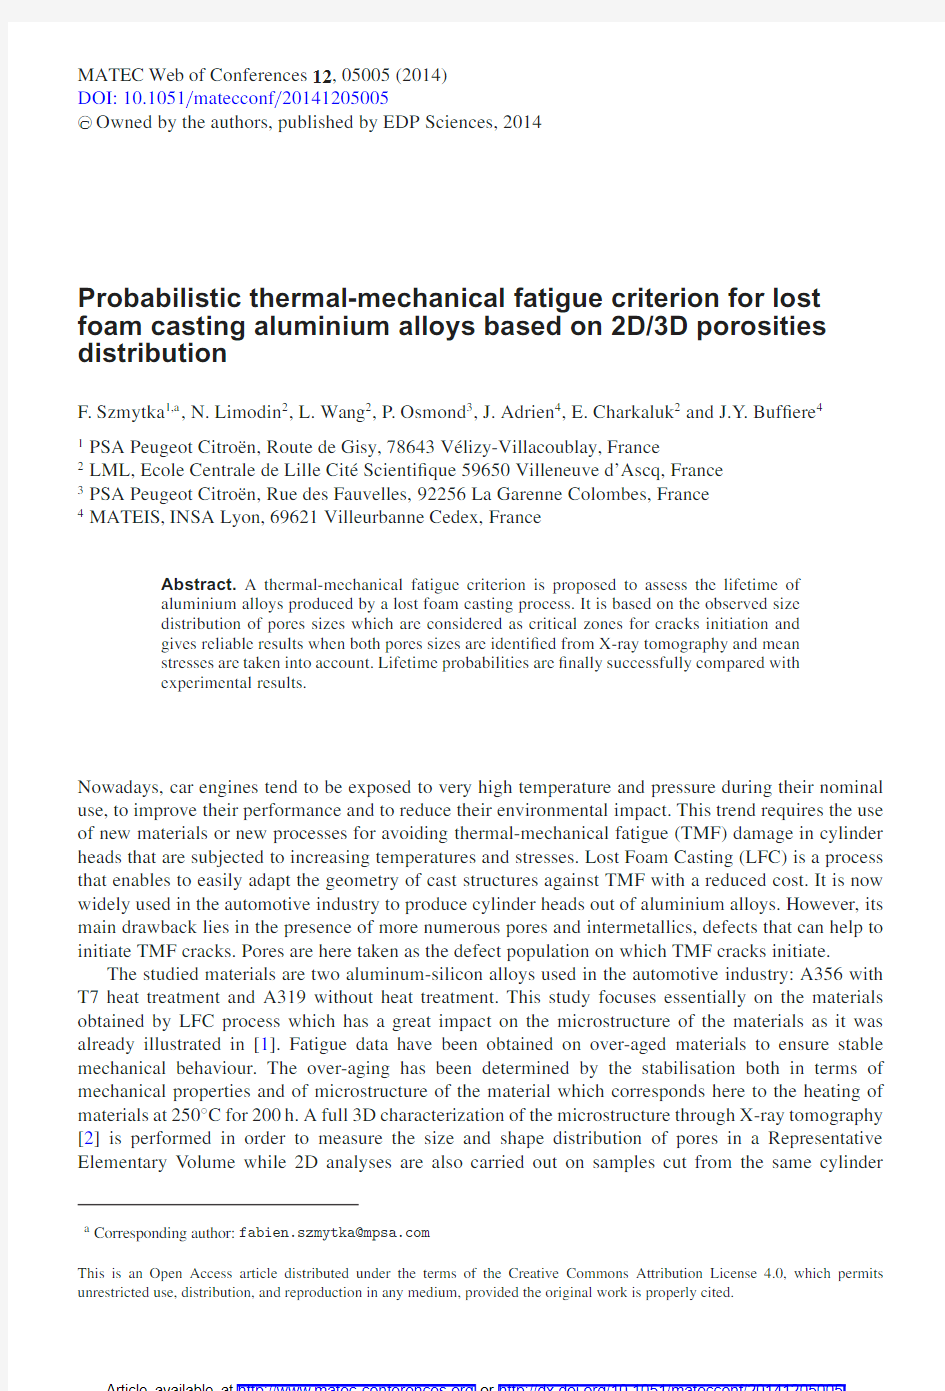 Probabilistic thermal-mechanical fatigue criterion for lost